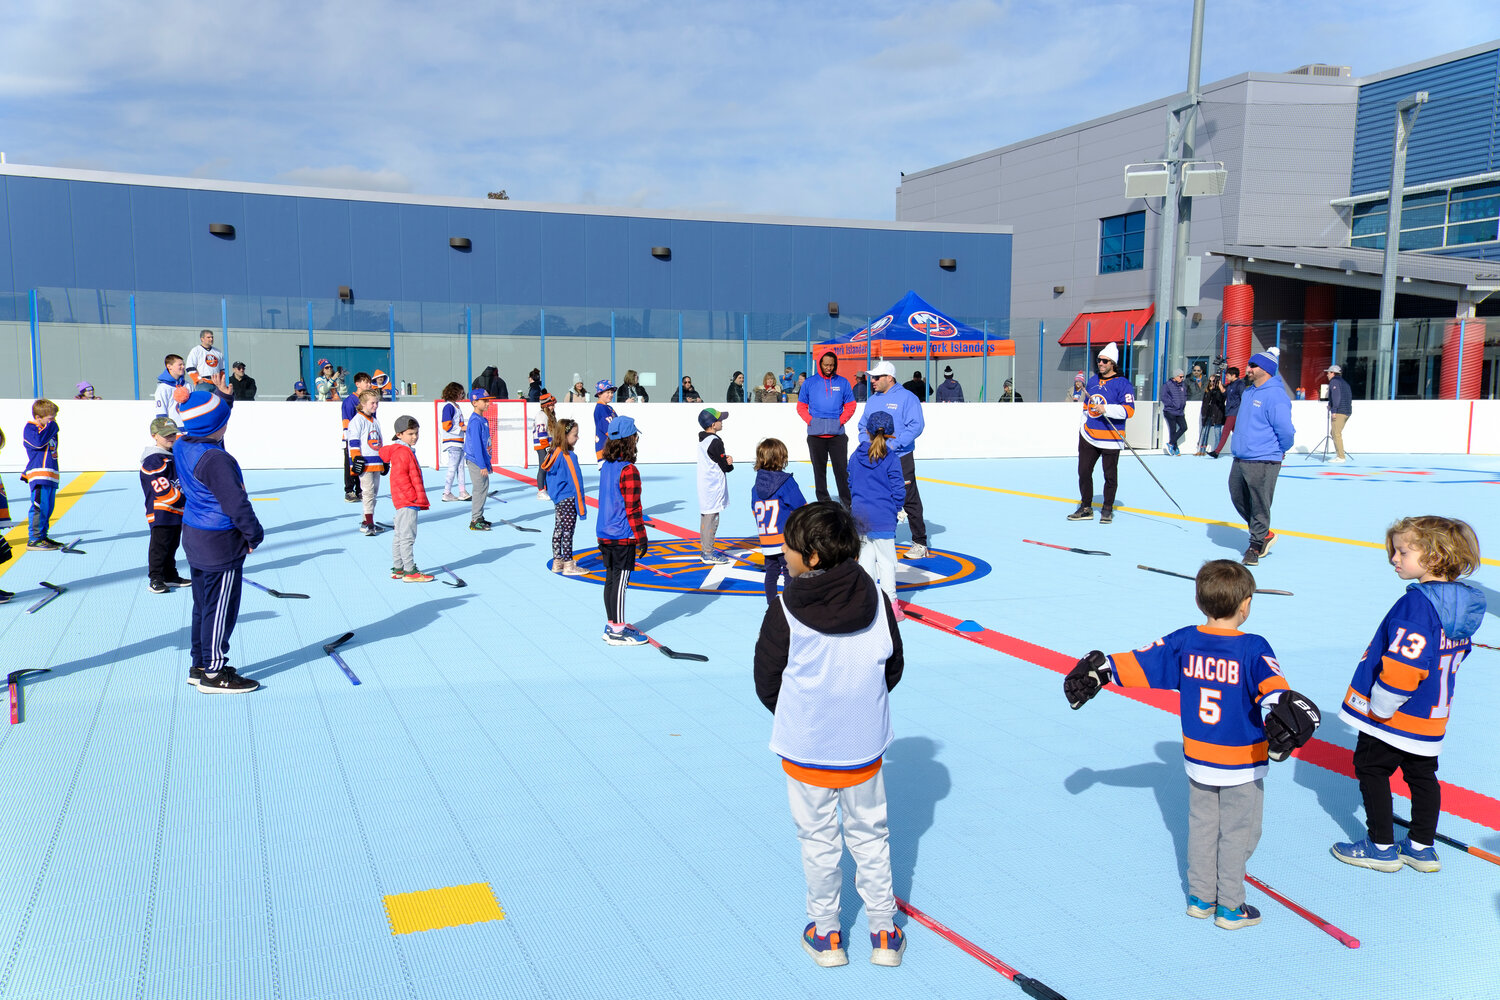 The rink was packed with kids from the local community, who not only got to play hockey with the community relations staff, but also from Islanders alumni, Matt Moulson, who attended the clinic.